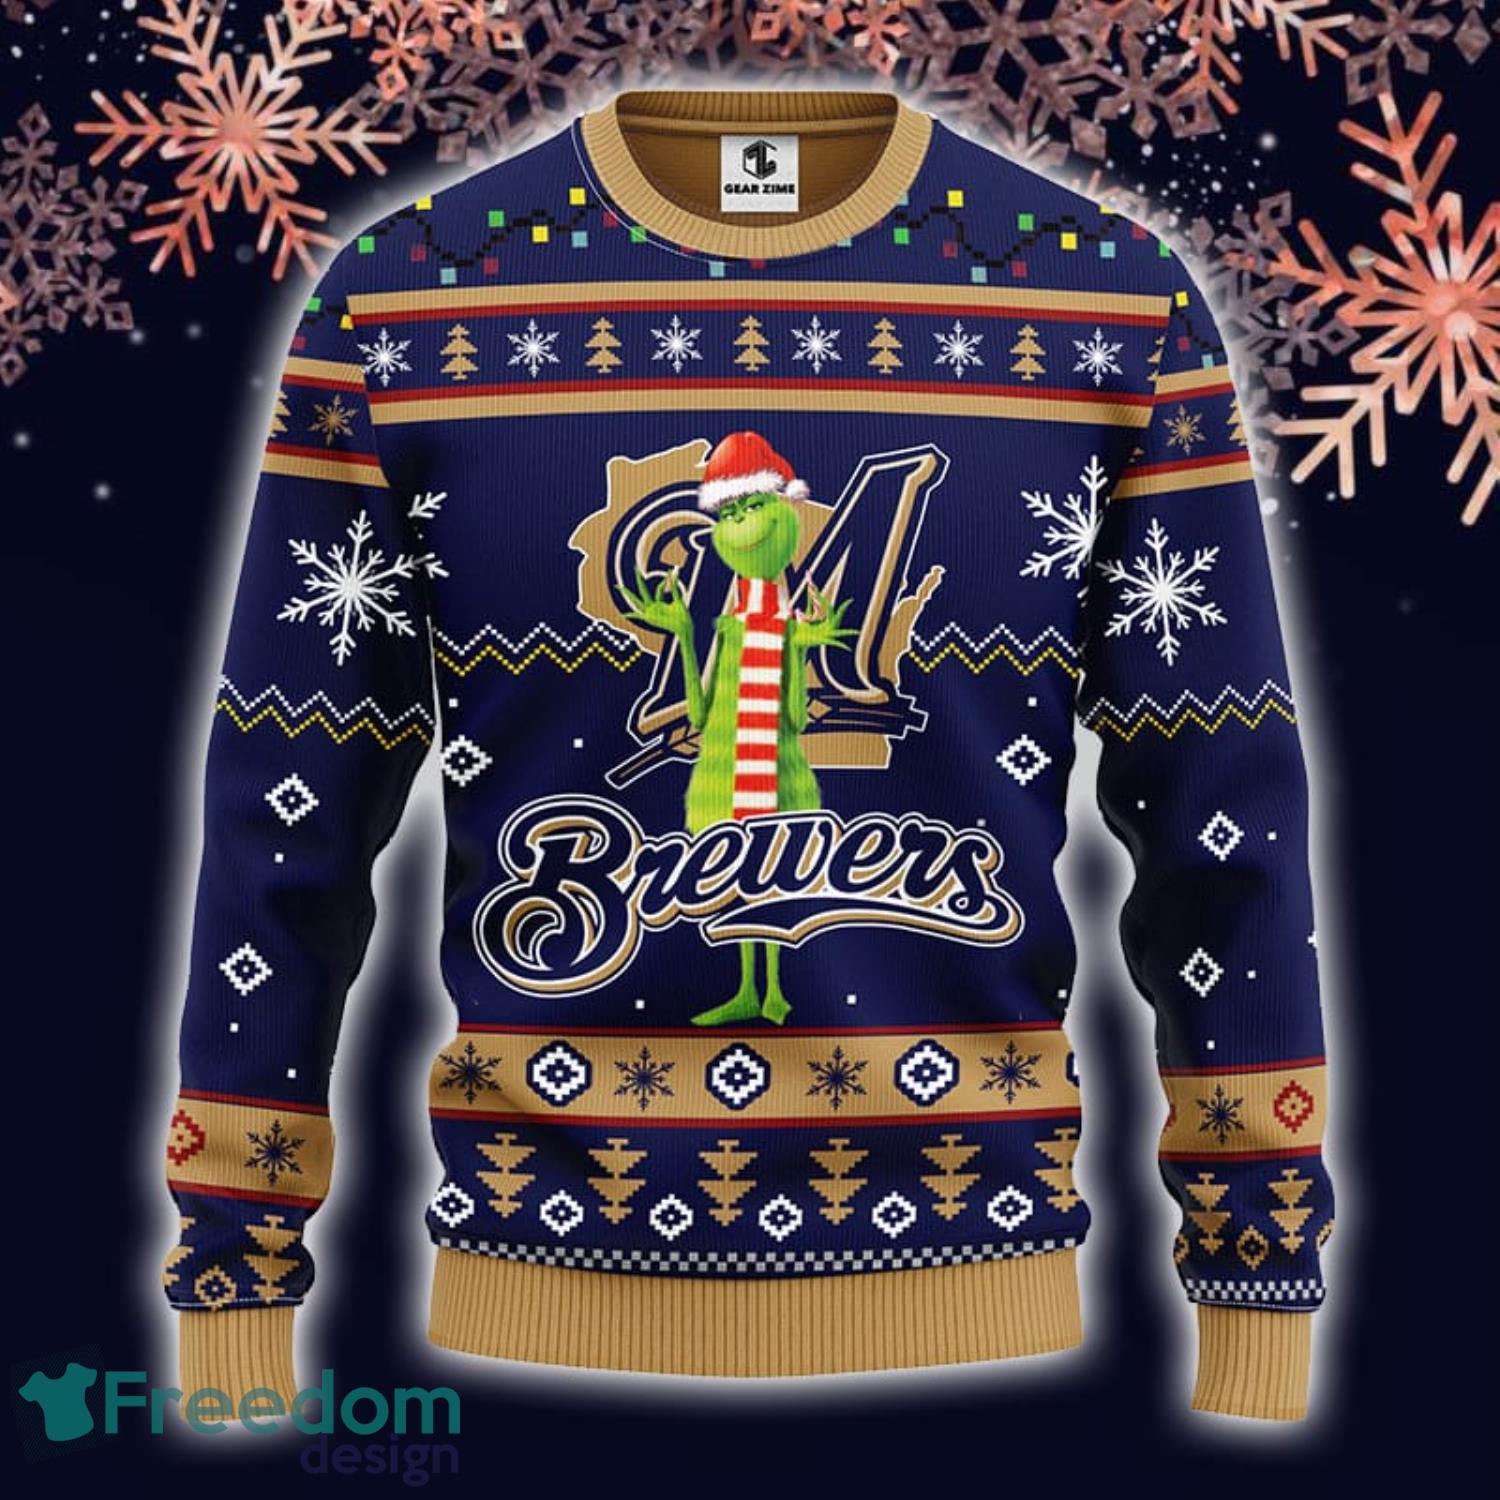 Milwaukee Brewers Funny Grinch Christmas Ugly Sweater - Shibtee Clothing